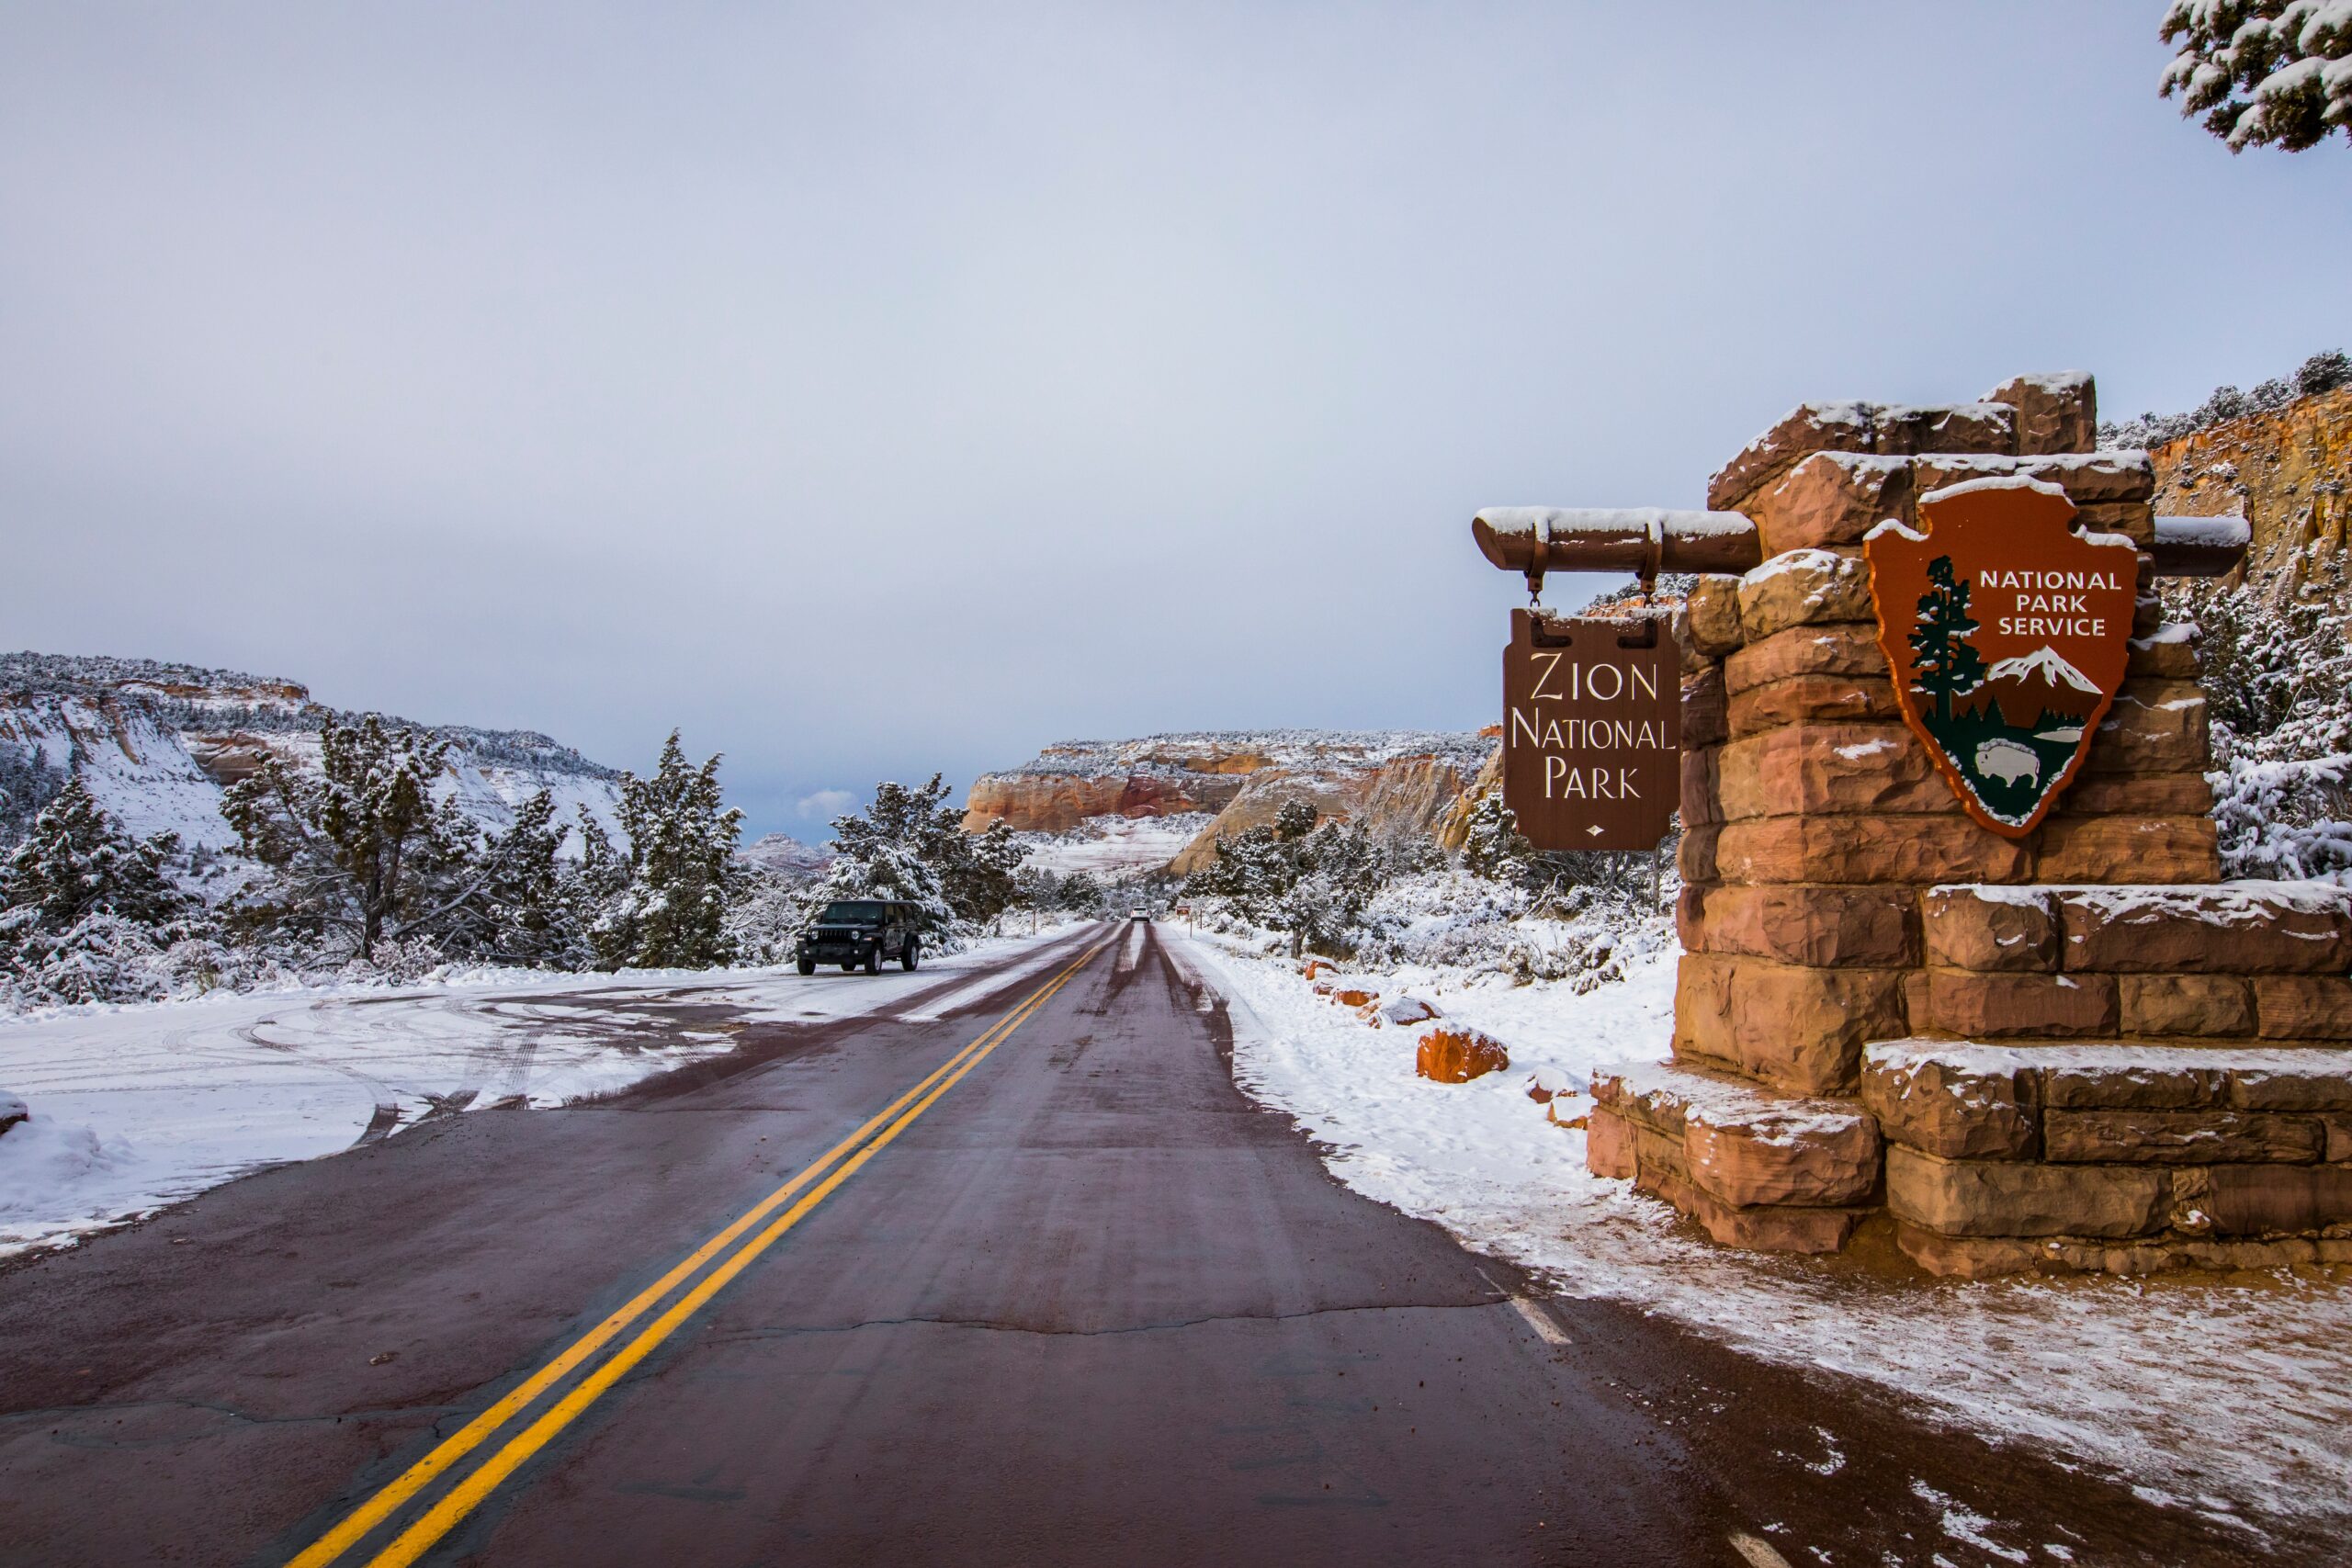 View of the entrance of Zion National Park in the snow 